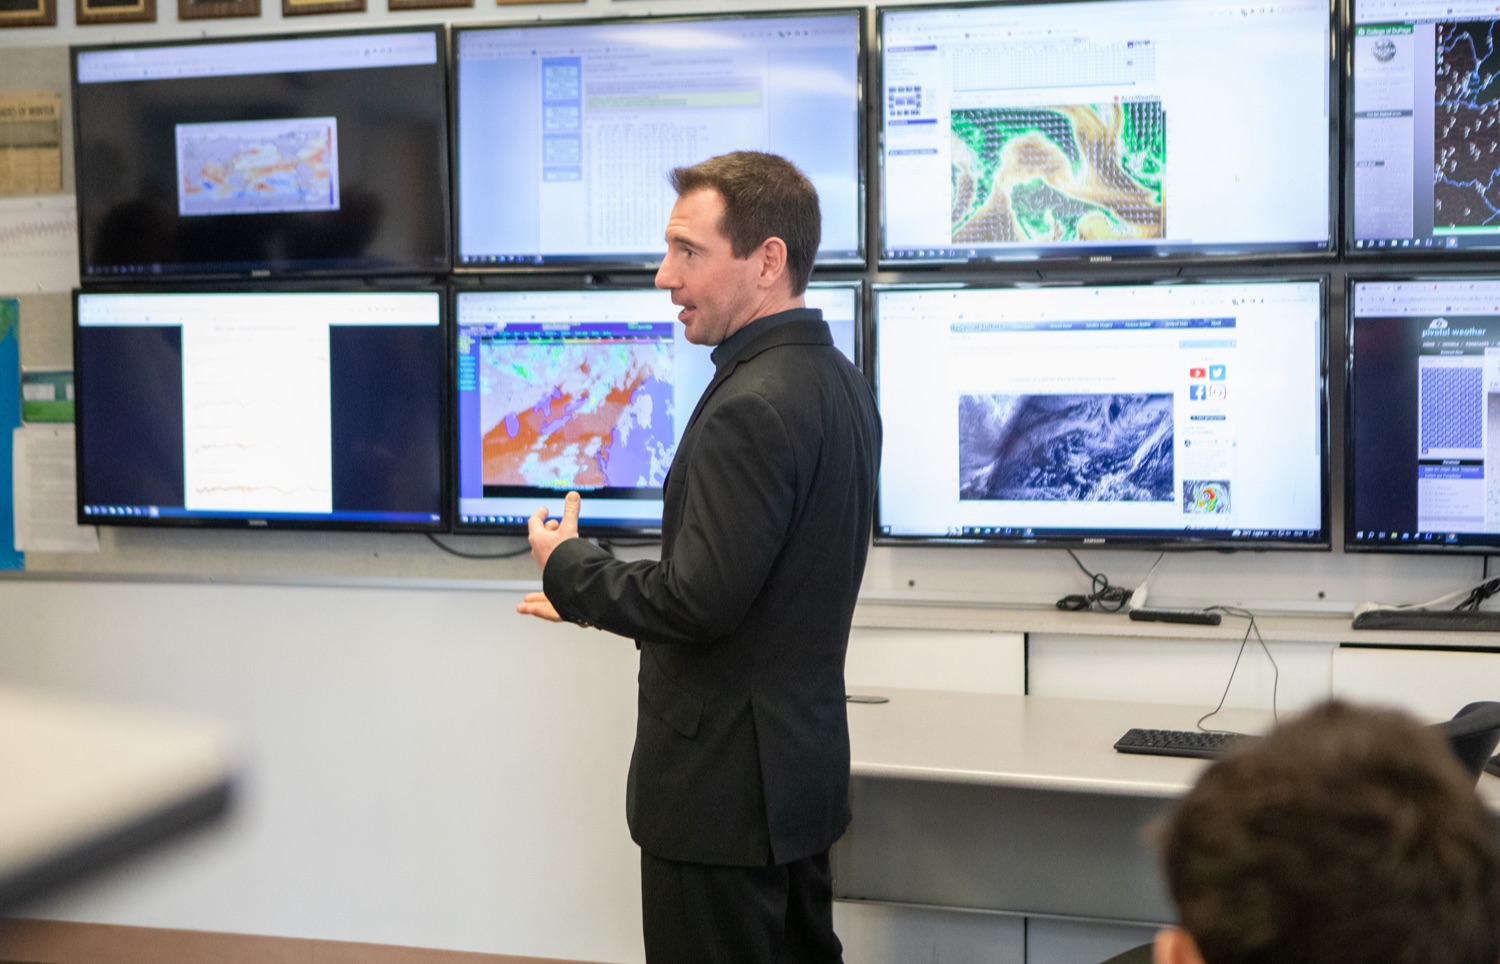 PDE Secretary Dr. Khalid N. Mumin takes a tour of the Weather Information Center. Millersville Meteorology is a nationally recognized flagship program of the university, with an innovative curriculum in space weather, air quality, water resources, data analytics, and emergency response and disaster preparedness. In 2020, Millersville became the seventh university in Pennsylvania to be designated as a StormReady University...Pennsylvania Department of Education (PDE) Secretary Dr. Khalid N. Mumin and Deputy Secretary Dr. Kate Shaw joined Pennsylvania State System of Higher Education (PASSHE) Chancellor Dan Greenstein at Millersville University to highlight Governor Shapiros proposed investments in higher education and how Pennsylvanias public postsecondary system is preparing students to be workforce-ready upon graduation.. .Governor Shapiros blueprint for higher education will help Pennsylvanias public universities build on areas of strength and address the challenges caused by a 30-year disinvestment in higher education by the Commonwealth, such as competition between universities that results in higher costs and lower enrollment. Governor Shapiros blueprint will ensure better coordination across PASSHE universities and community colleges to expand access to affordable, workforce-ready credentials and degrees across Pennsylvania  including in areas that currently lack access.. .Our Commonwealths institutions of higher education, like Millersville University, do an incredible job preparing students for the future and connecting them with future opportunities, said Secretary Khalid N. Mumin. Governor Josh Shapiros new blueprint for higher education will end the era of disinvestment in our higher education sector, make postsecondary education more accessible and affordable to more Pennsylvanians, and allow these schools to continue to do what they do besteducate learners..<br><a href="https://filesource.amperwave.net/commonwealthofpa/photo/24436_PDE_Blueprint_ERD_002.jpg" target="_blank">⇣ Download Photo</a>